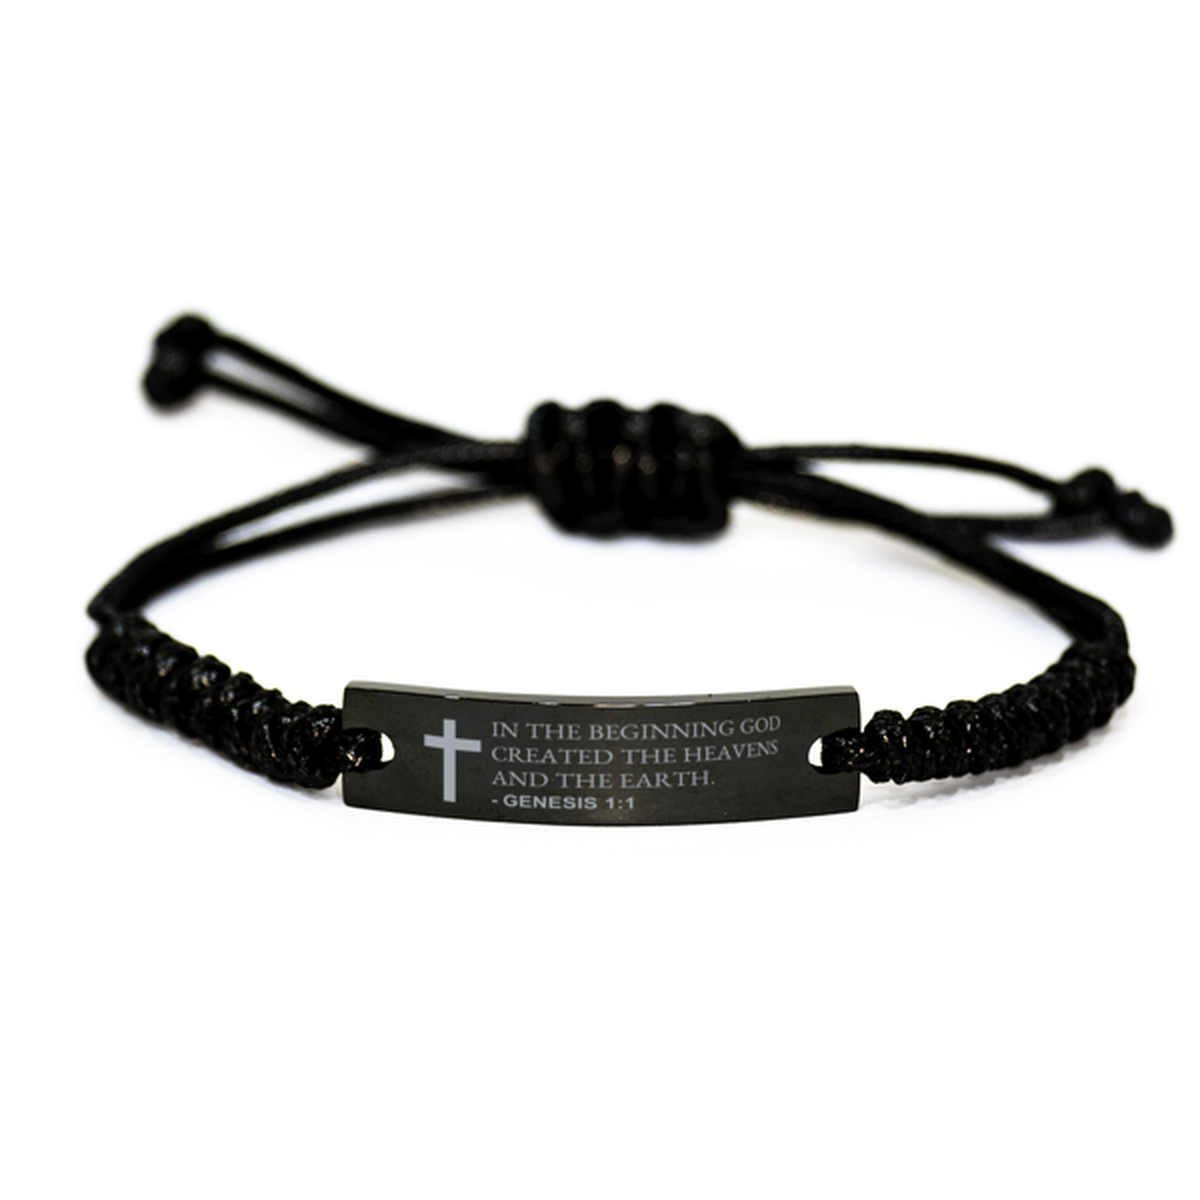 Bible Verse Rope Bracelet, Genesis 1:1 In The Beginning God Created The Heavens And The, Christian Encouraging Gifts For Men Women Boys Girls